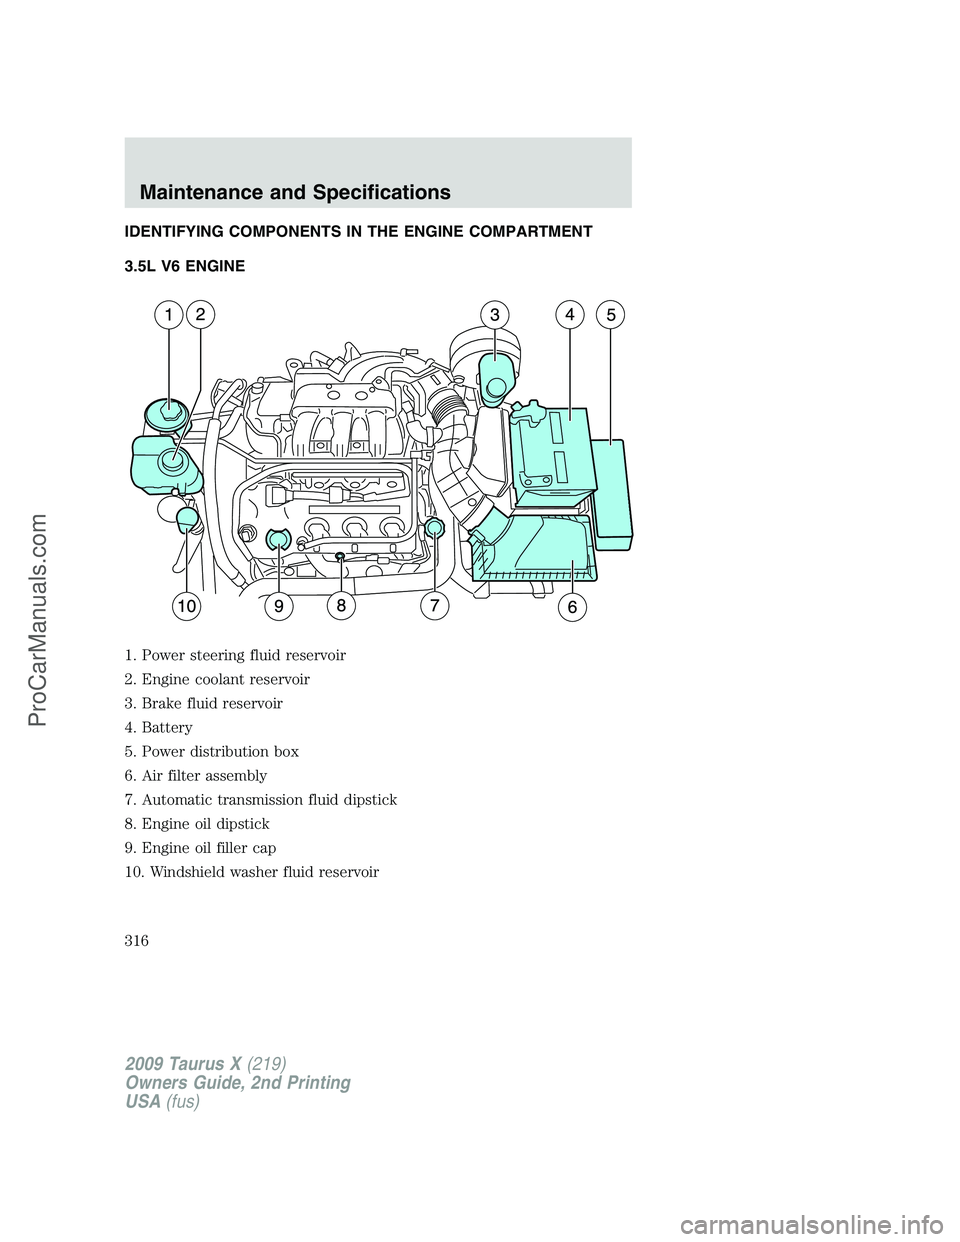 FORD FREESTYLE 2009  Owners Manual IDENTIFYING COMPONENTS IN THE ENGINE COMPARTMENT
3.5L V6 ENGINE
1. Power steering fluid reservoir
2. Engine coolant reservoir
3. Brake fluid reservoir
4. Battery
5. Power distribution box
6. Air filte